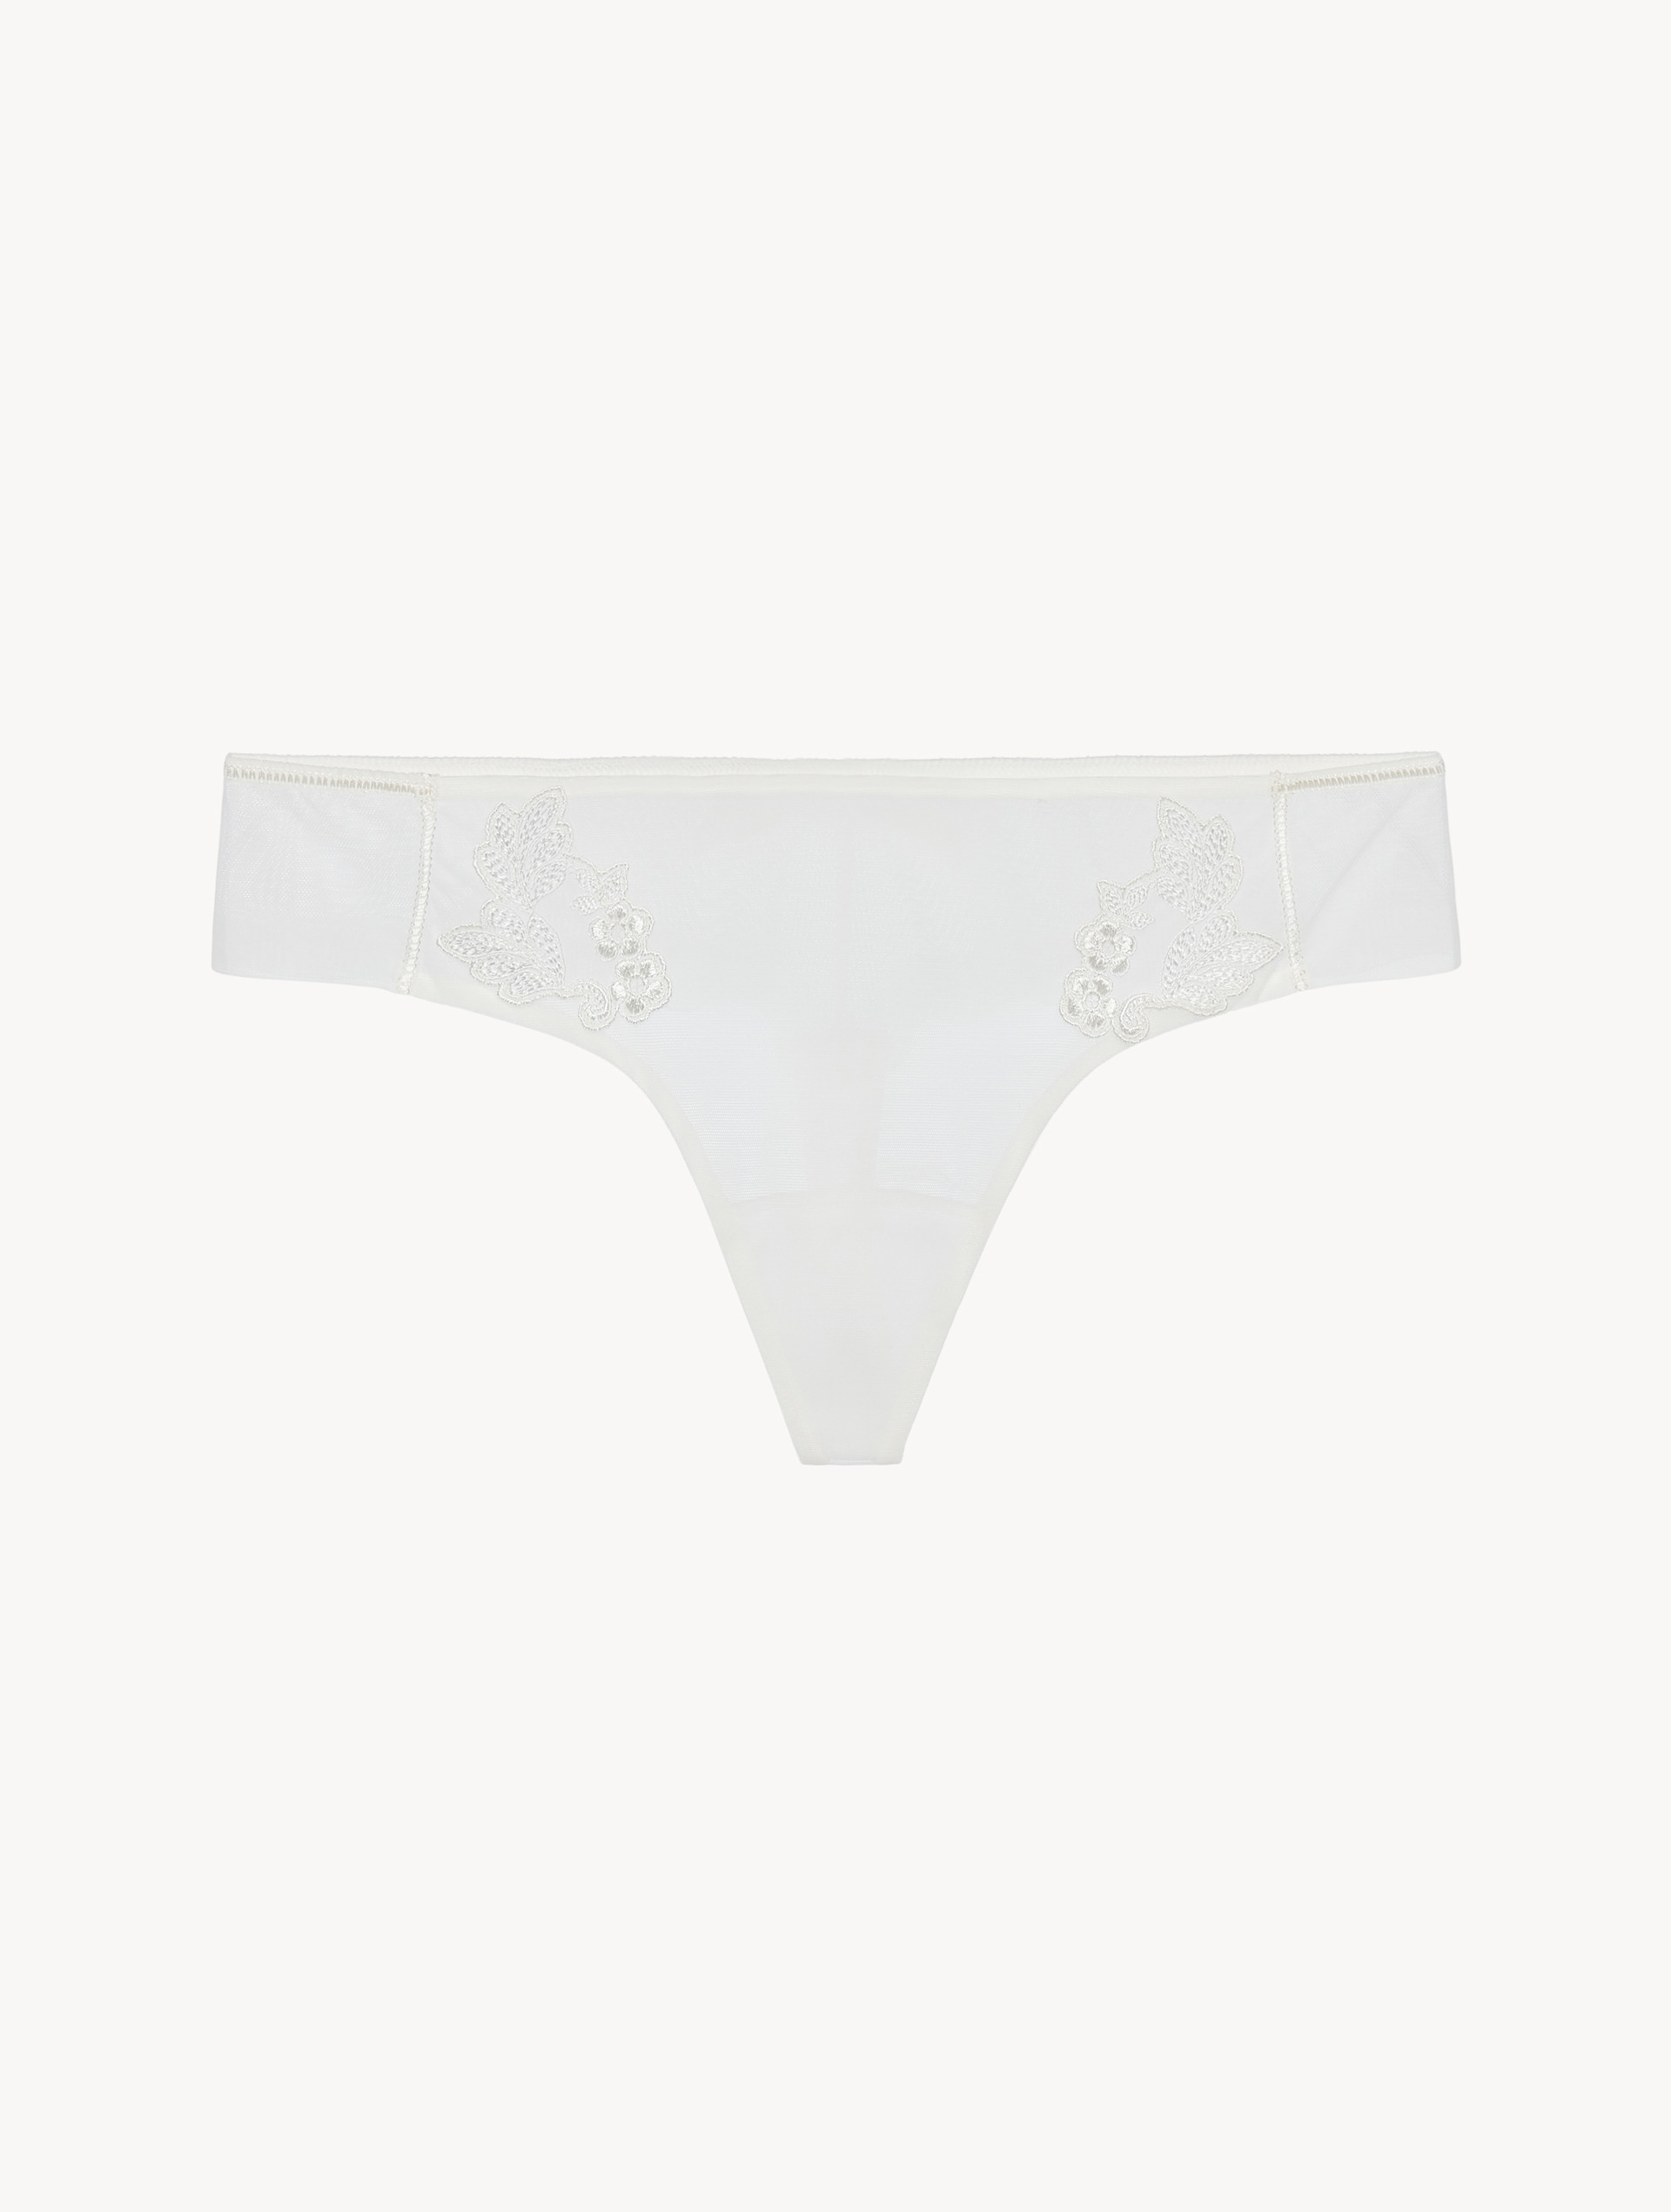 Luxury Stretch Tulle Thong in Sand | La Perla